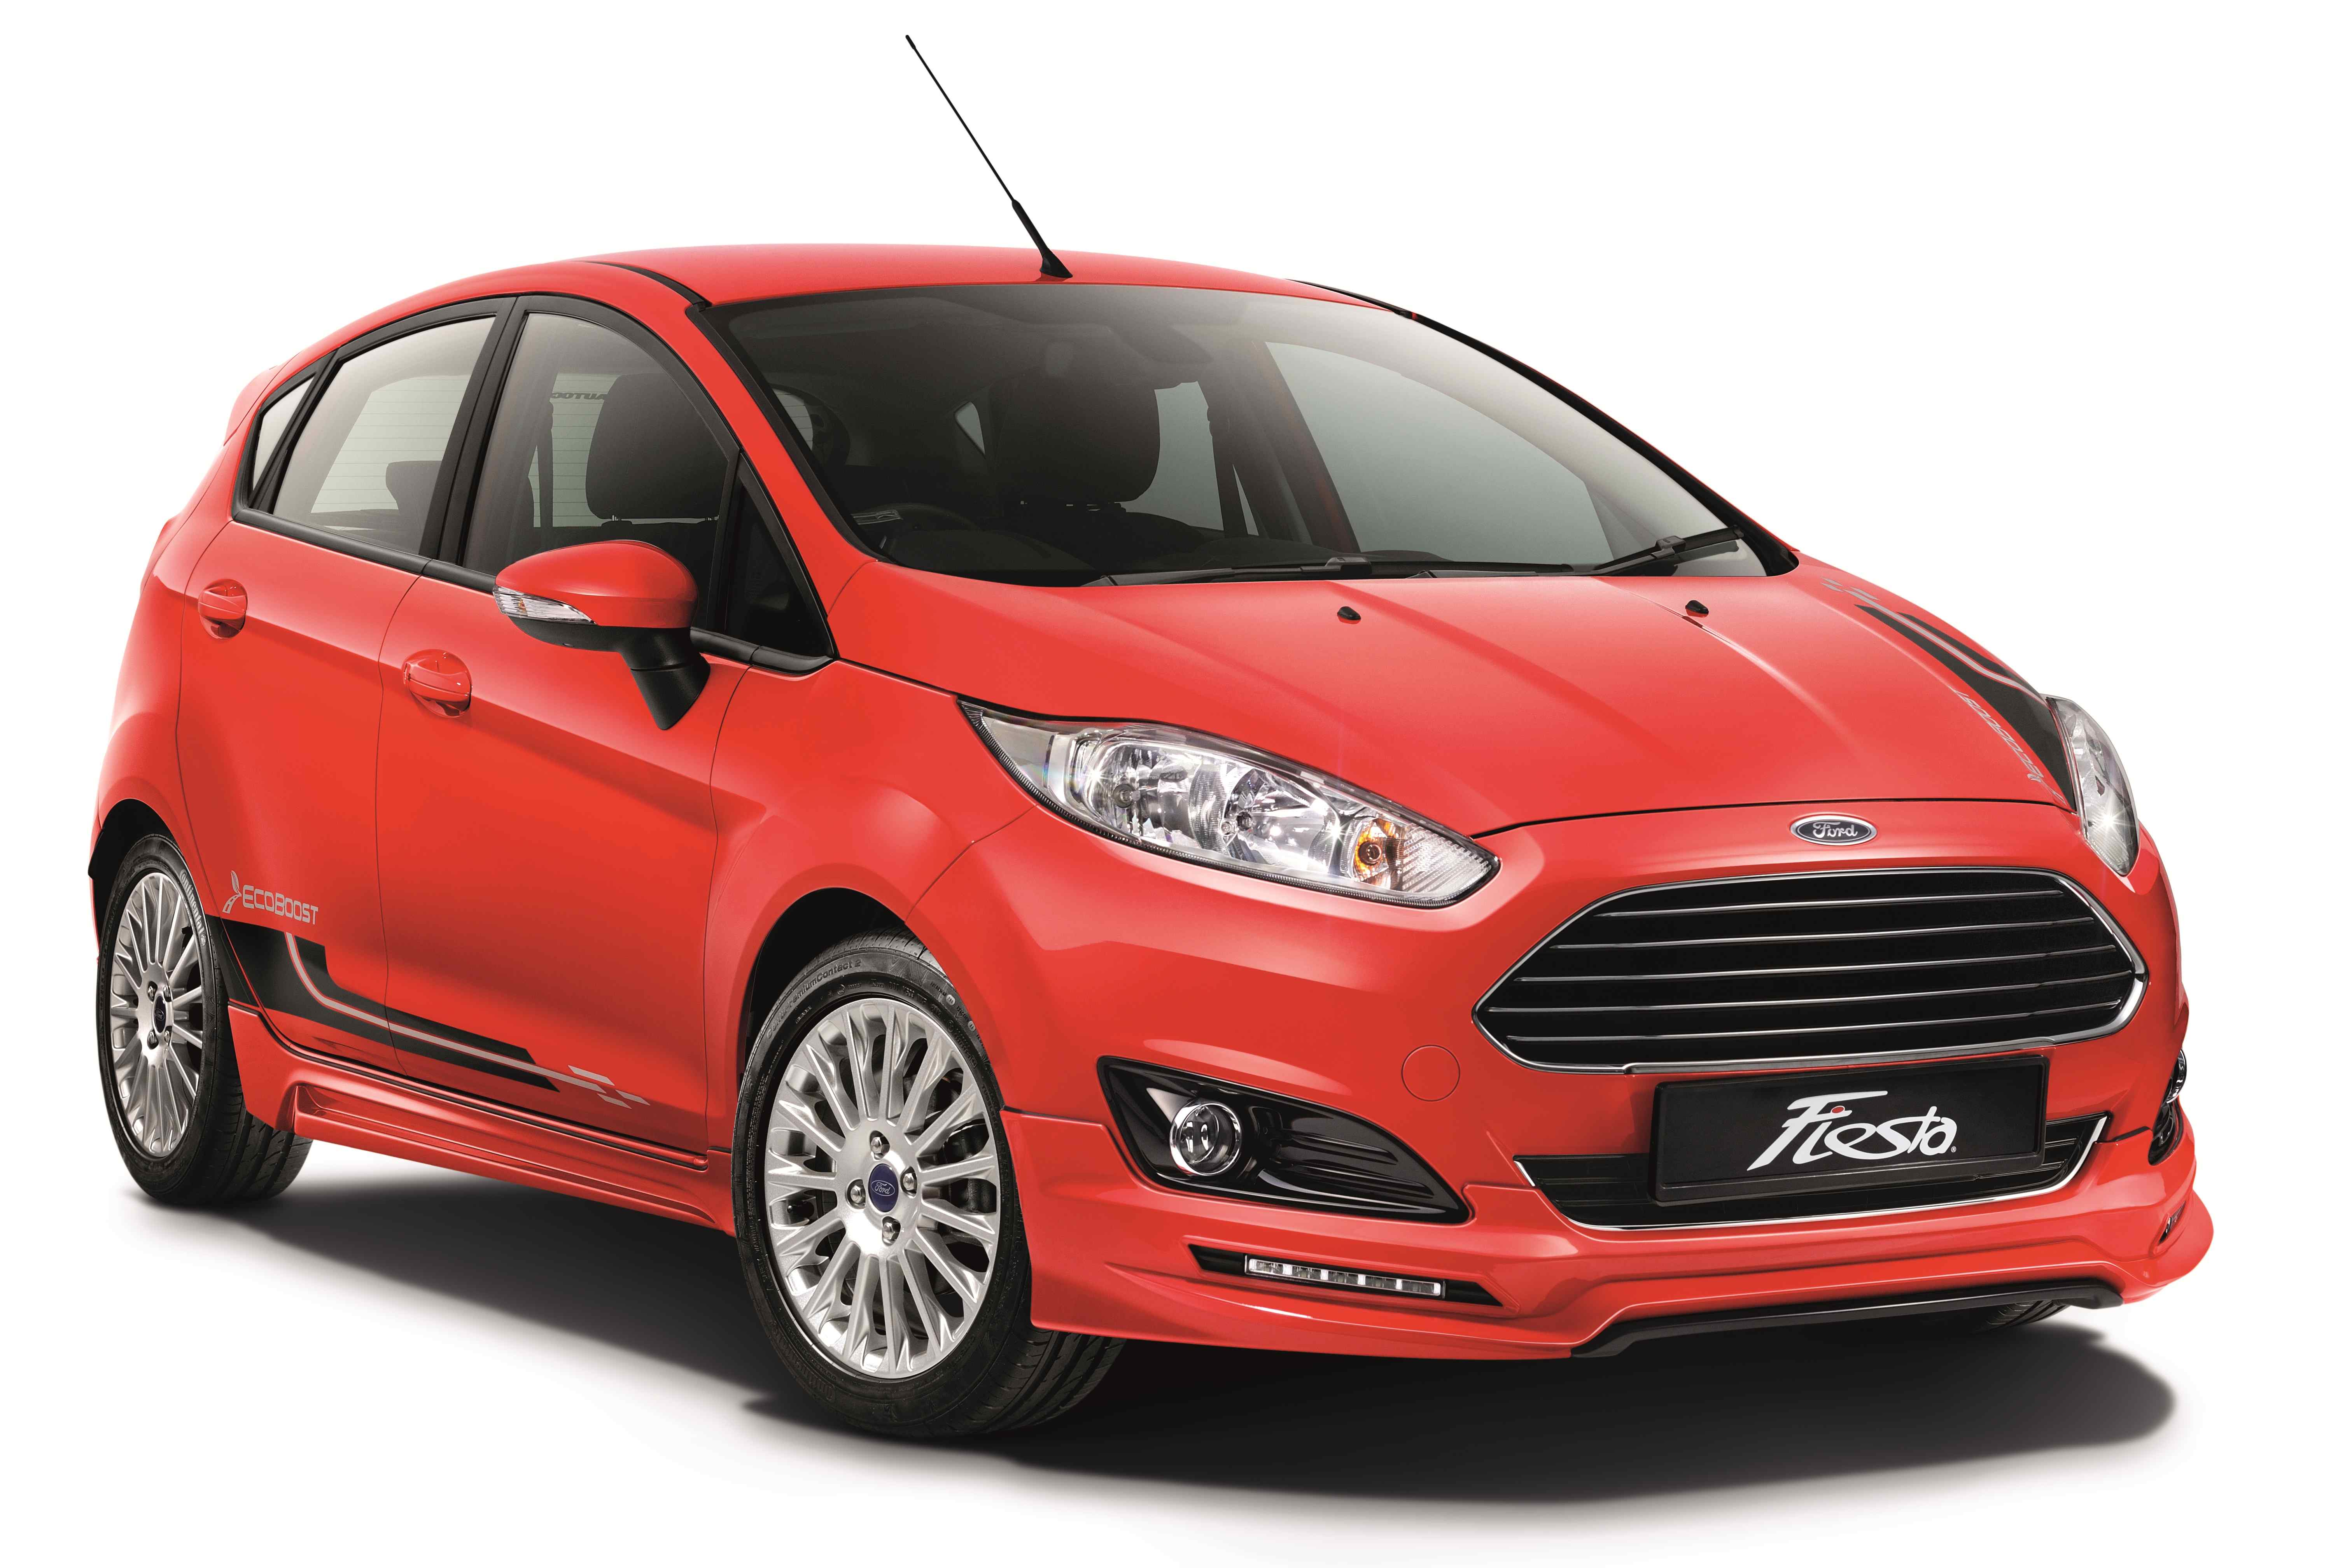 Ford Fiesta 1.0 EcoBoost launched RM93,888 Image 245566